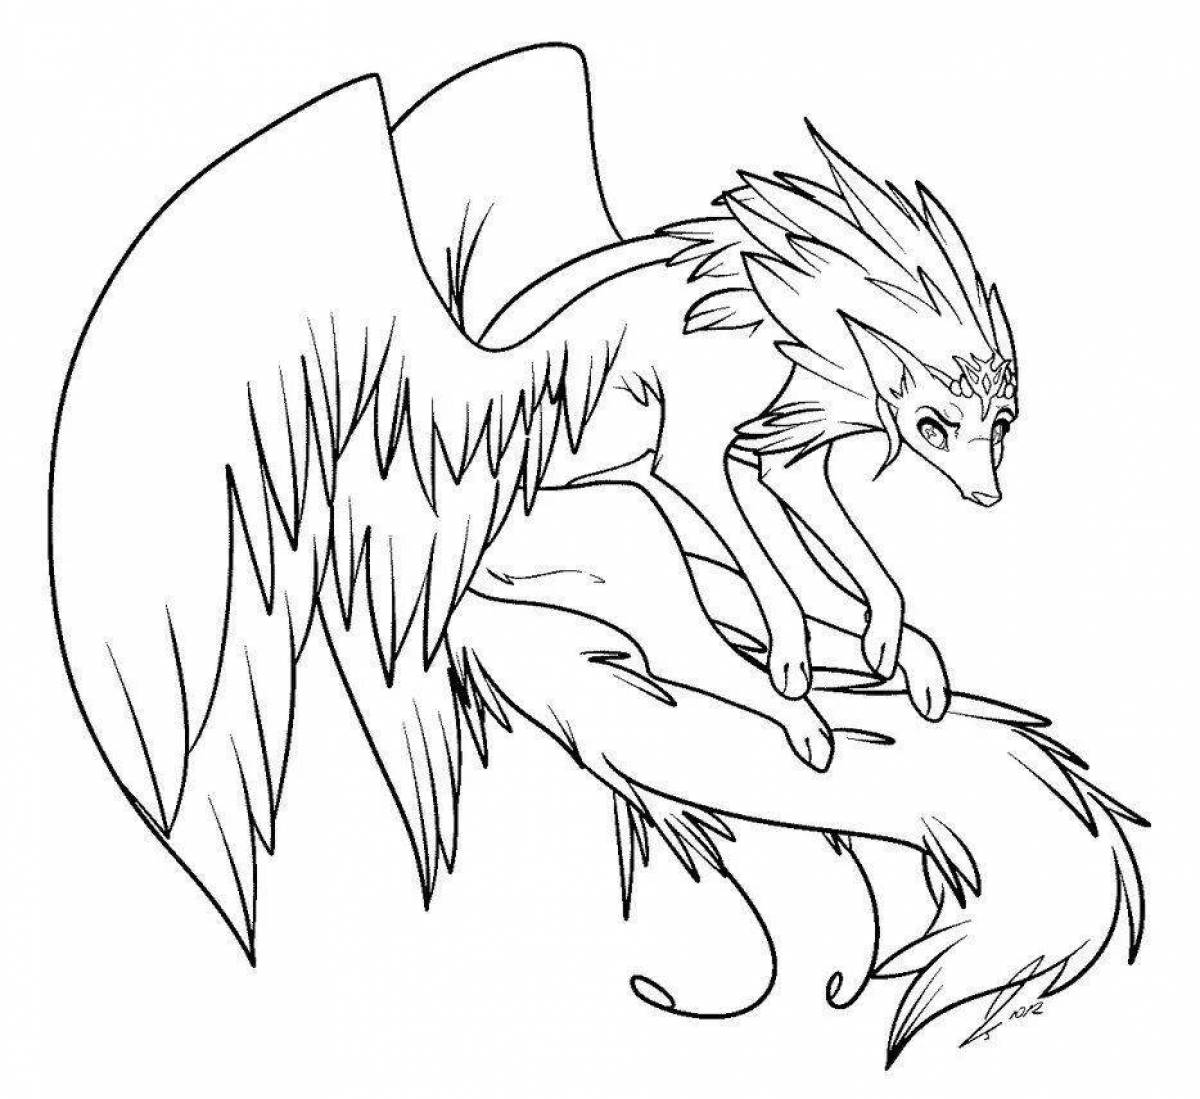 Amazing coloring page dog with wings